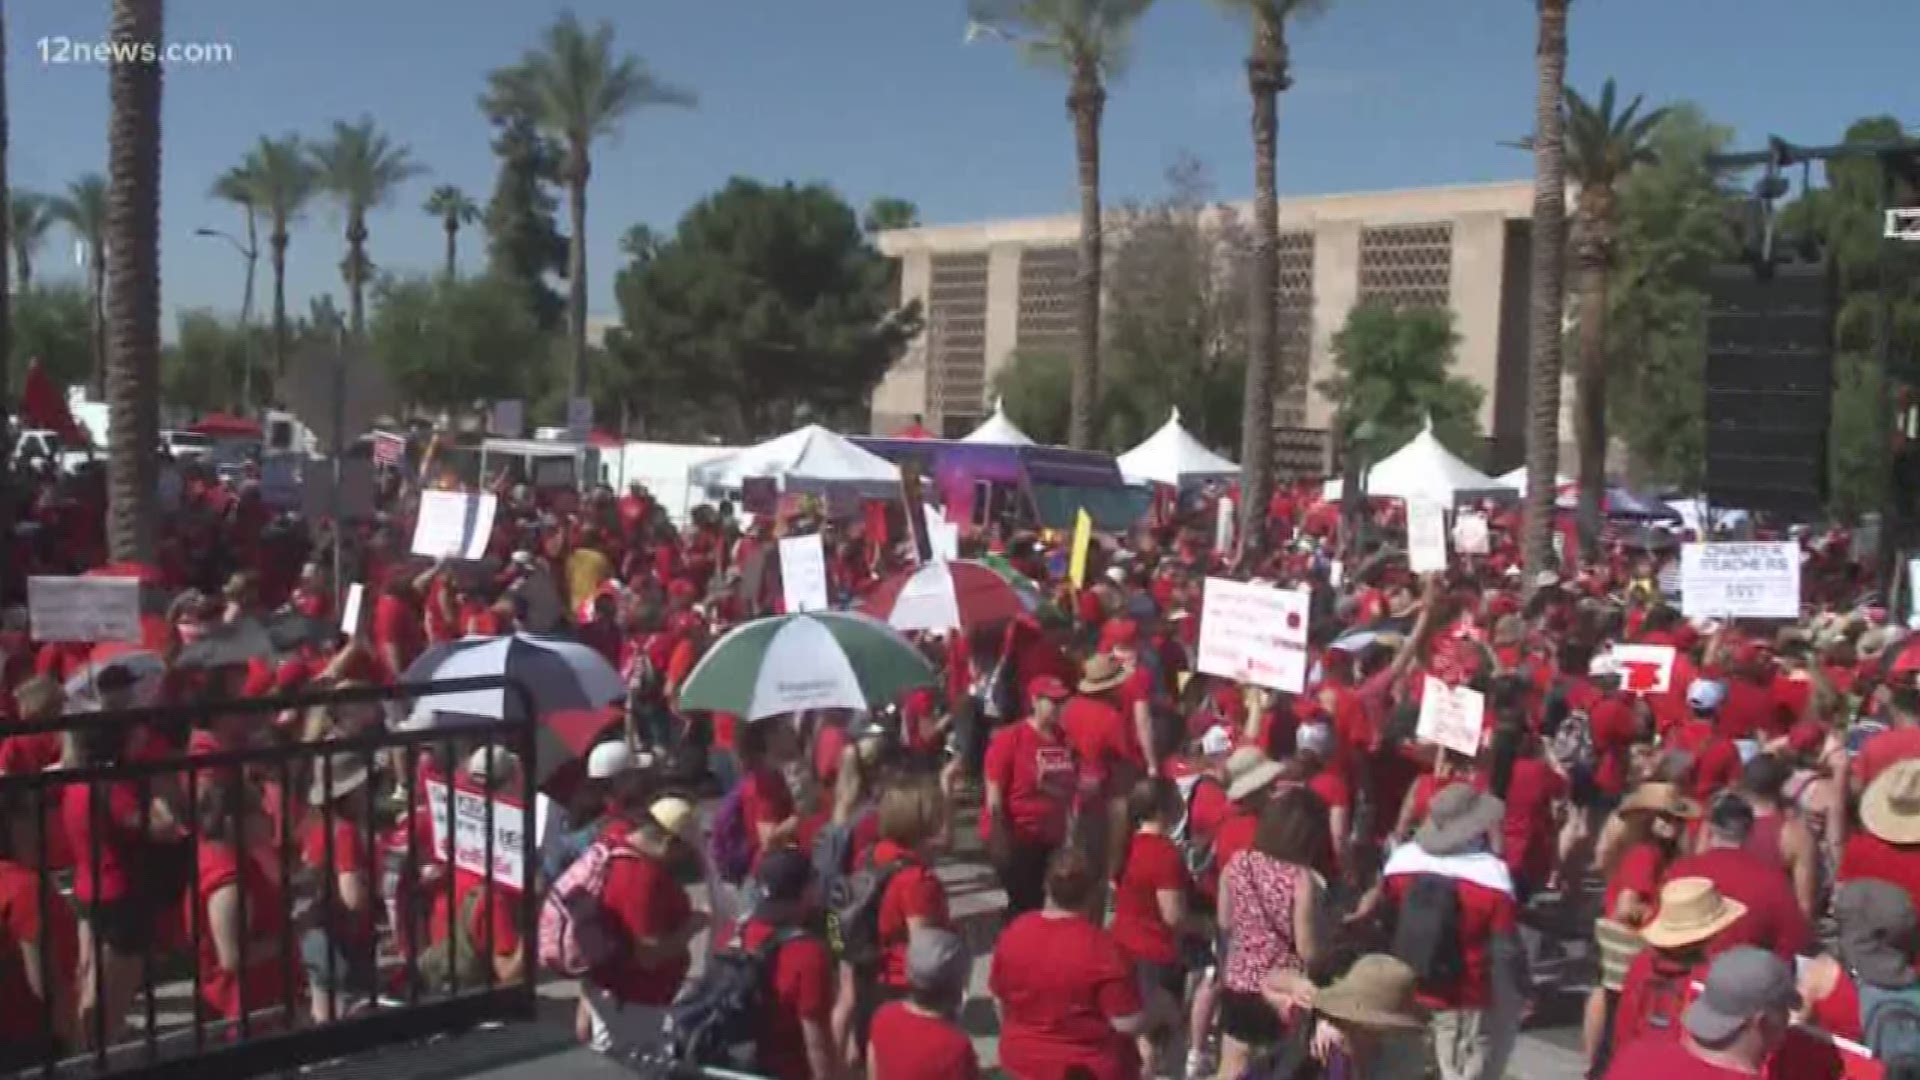 Since the teacher walkout started last week, more than 100,000 teachers and Red for Ed supporters have marched and rallied at the Capitol.